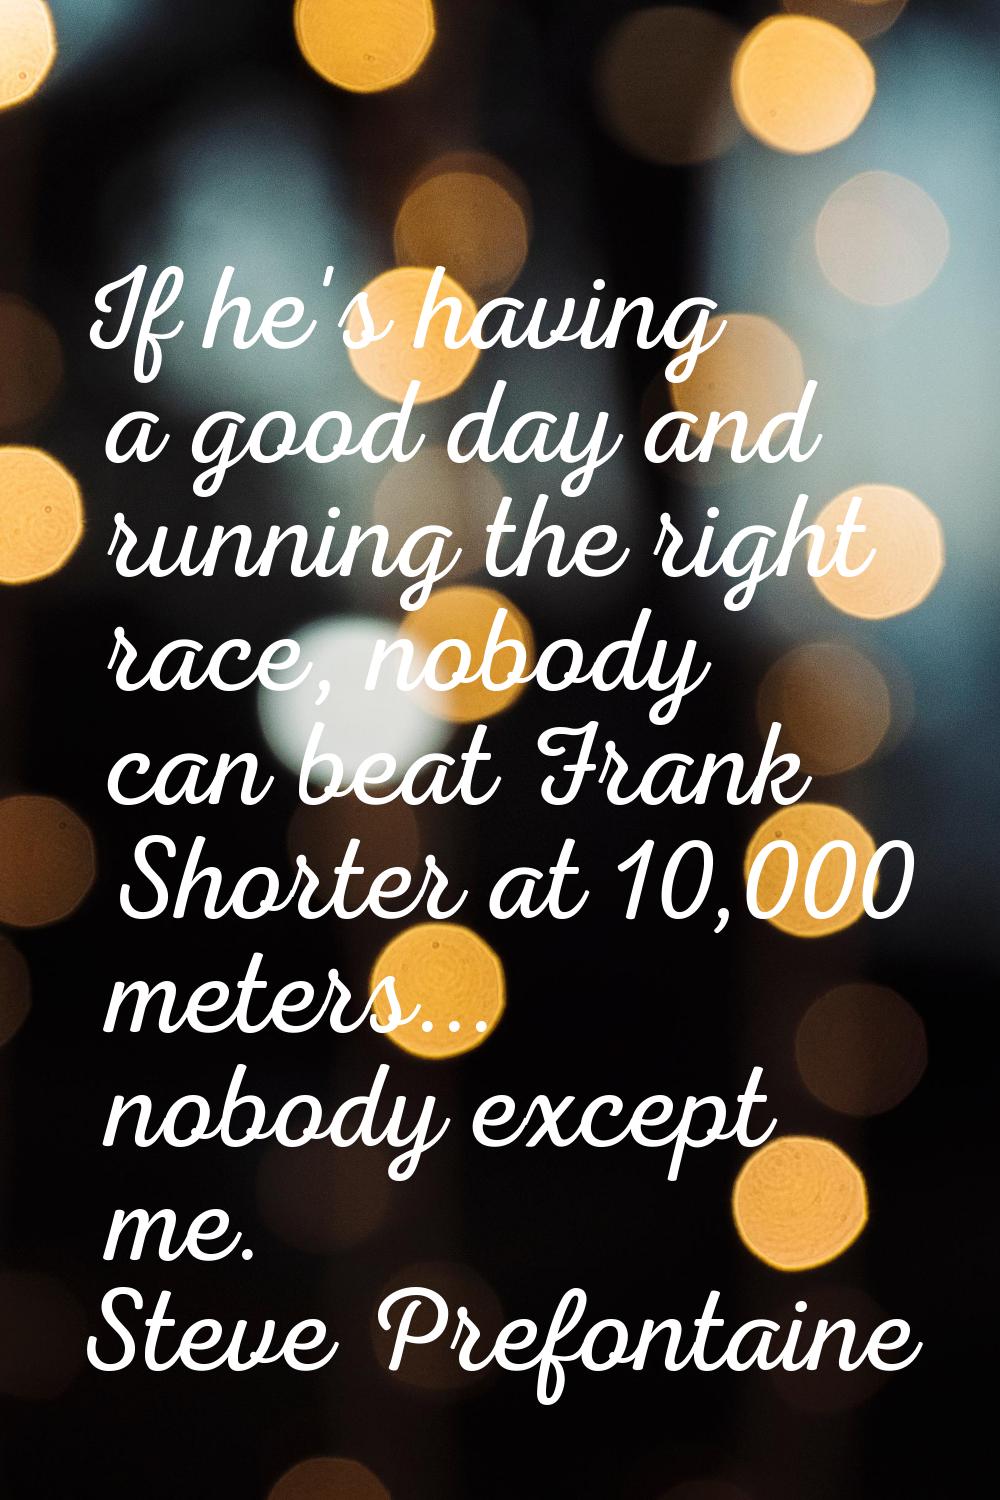 If he's having a good day and running the right race, nobody can beat Frank Shorter at 10,000 meter